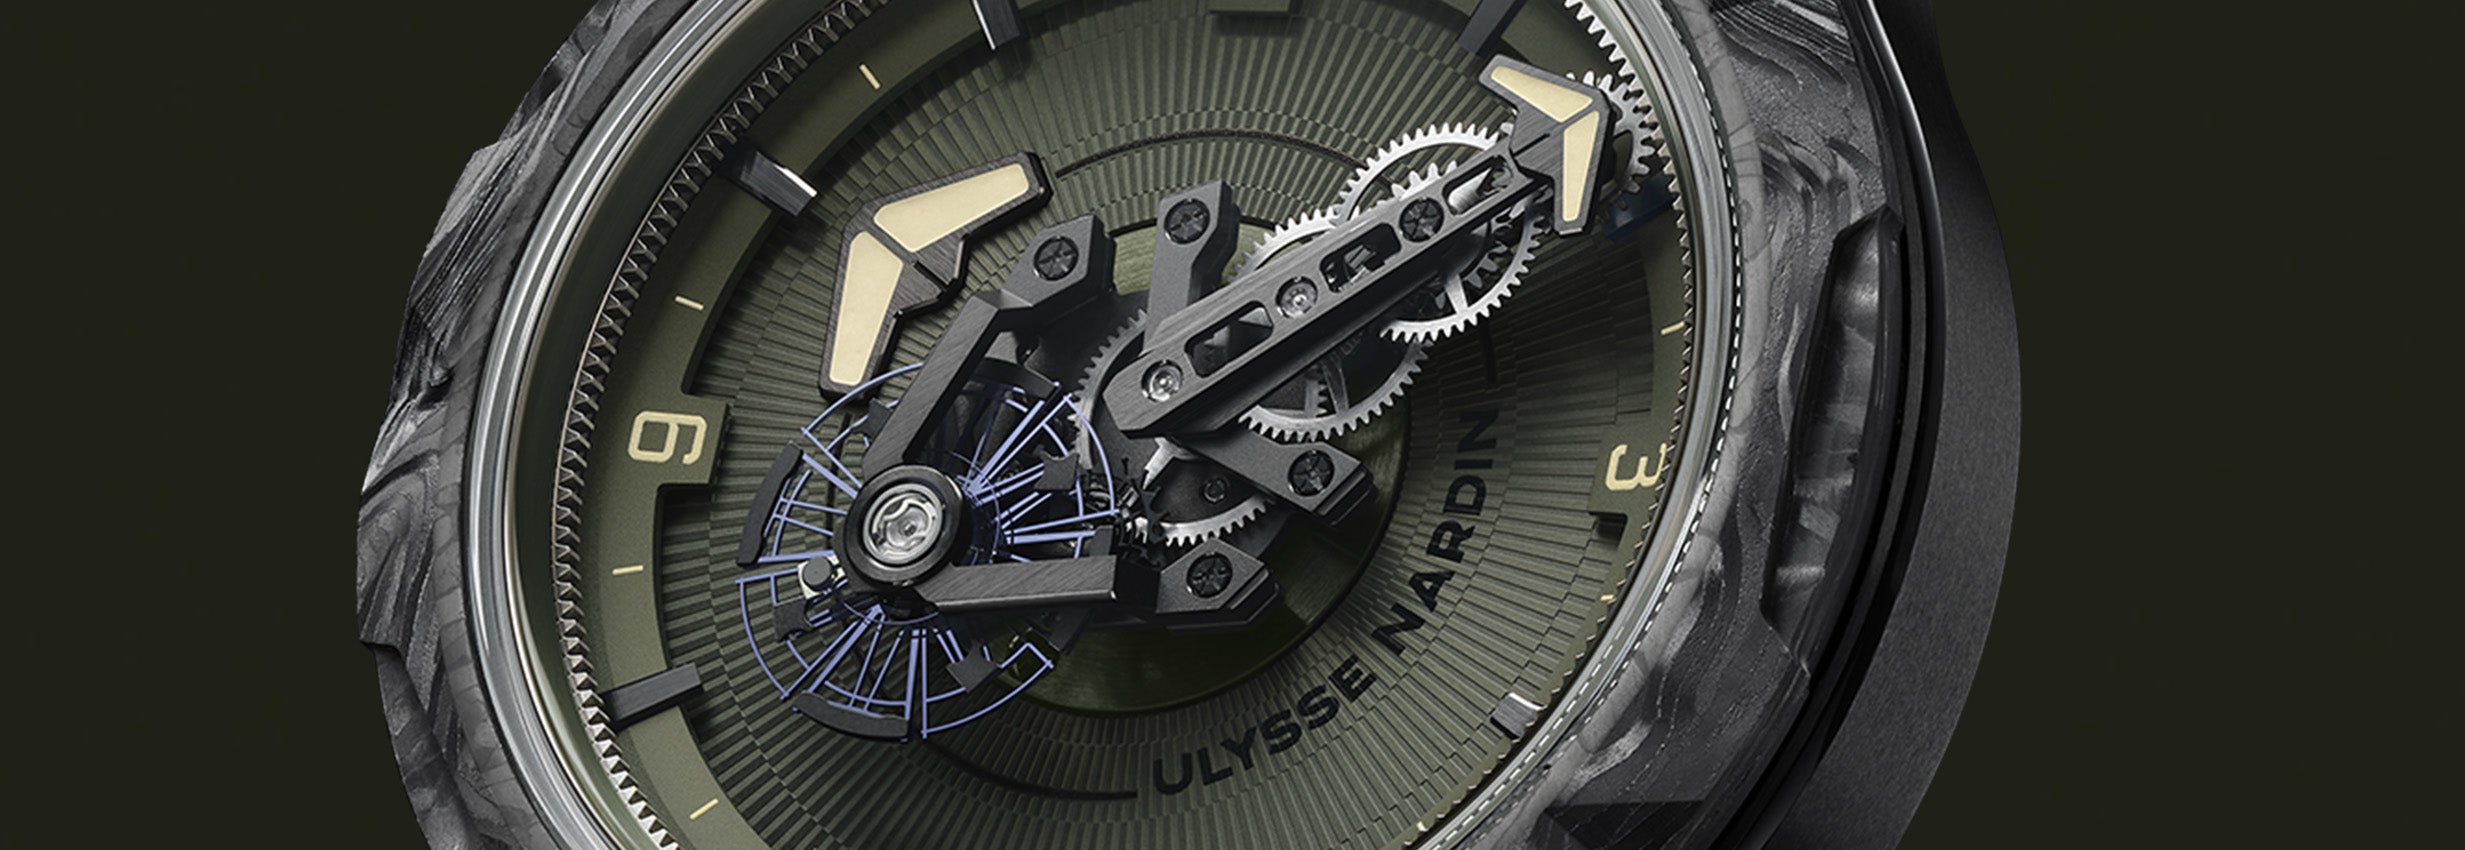 The Ulysse Nardin Freak One Ops 44mm: A Watch that Pushes the Boundaries of Engineering and Design